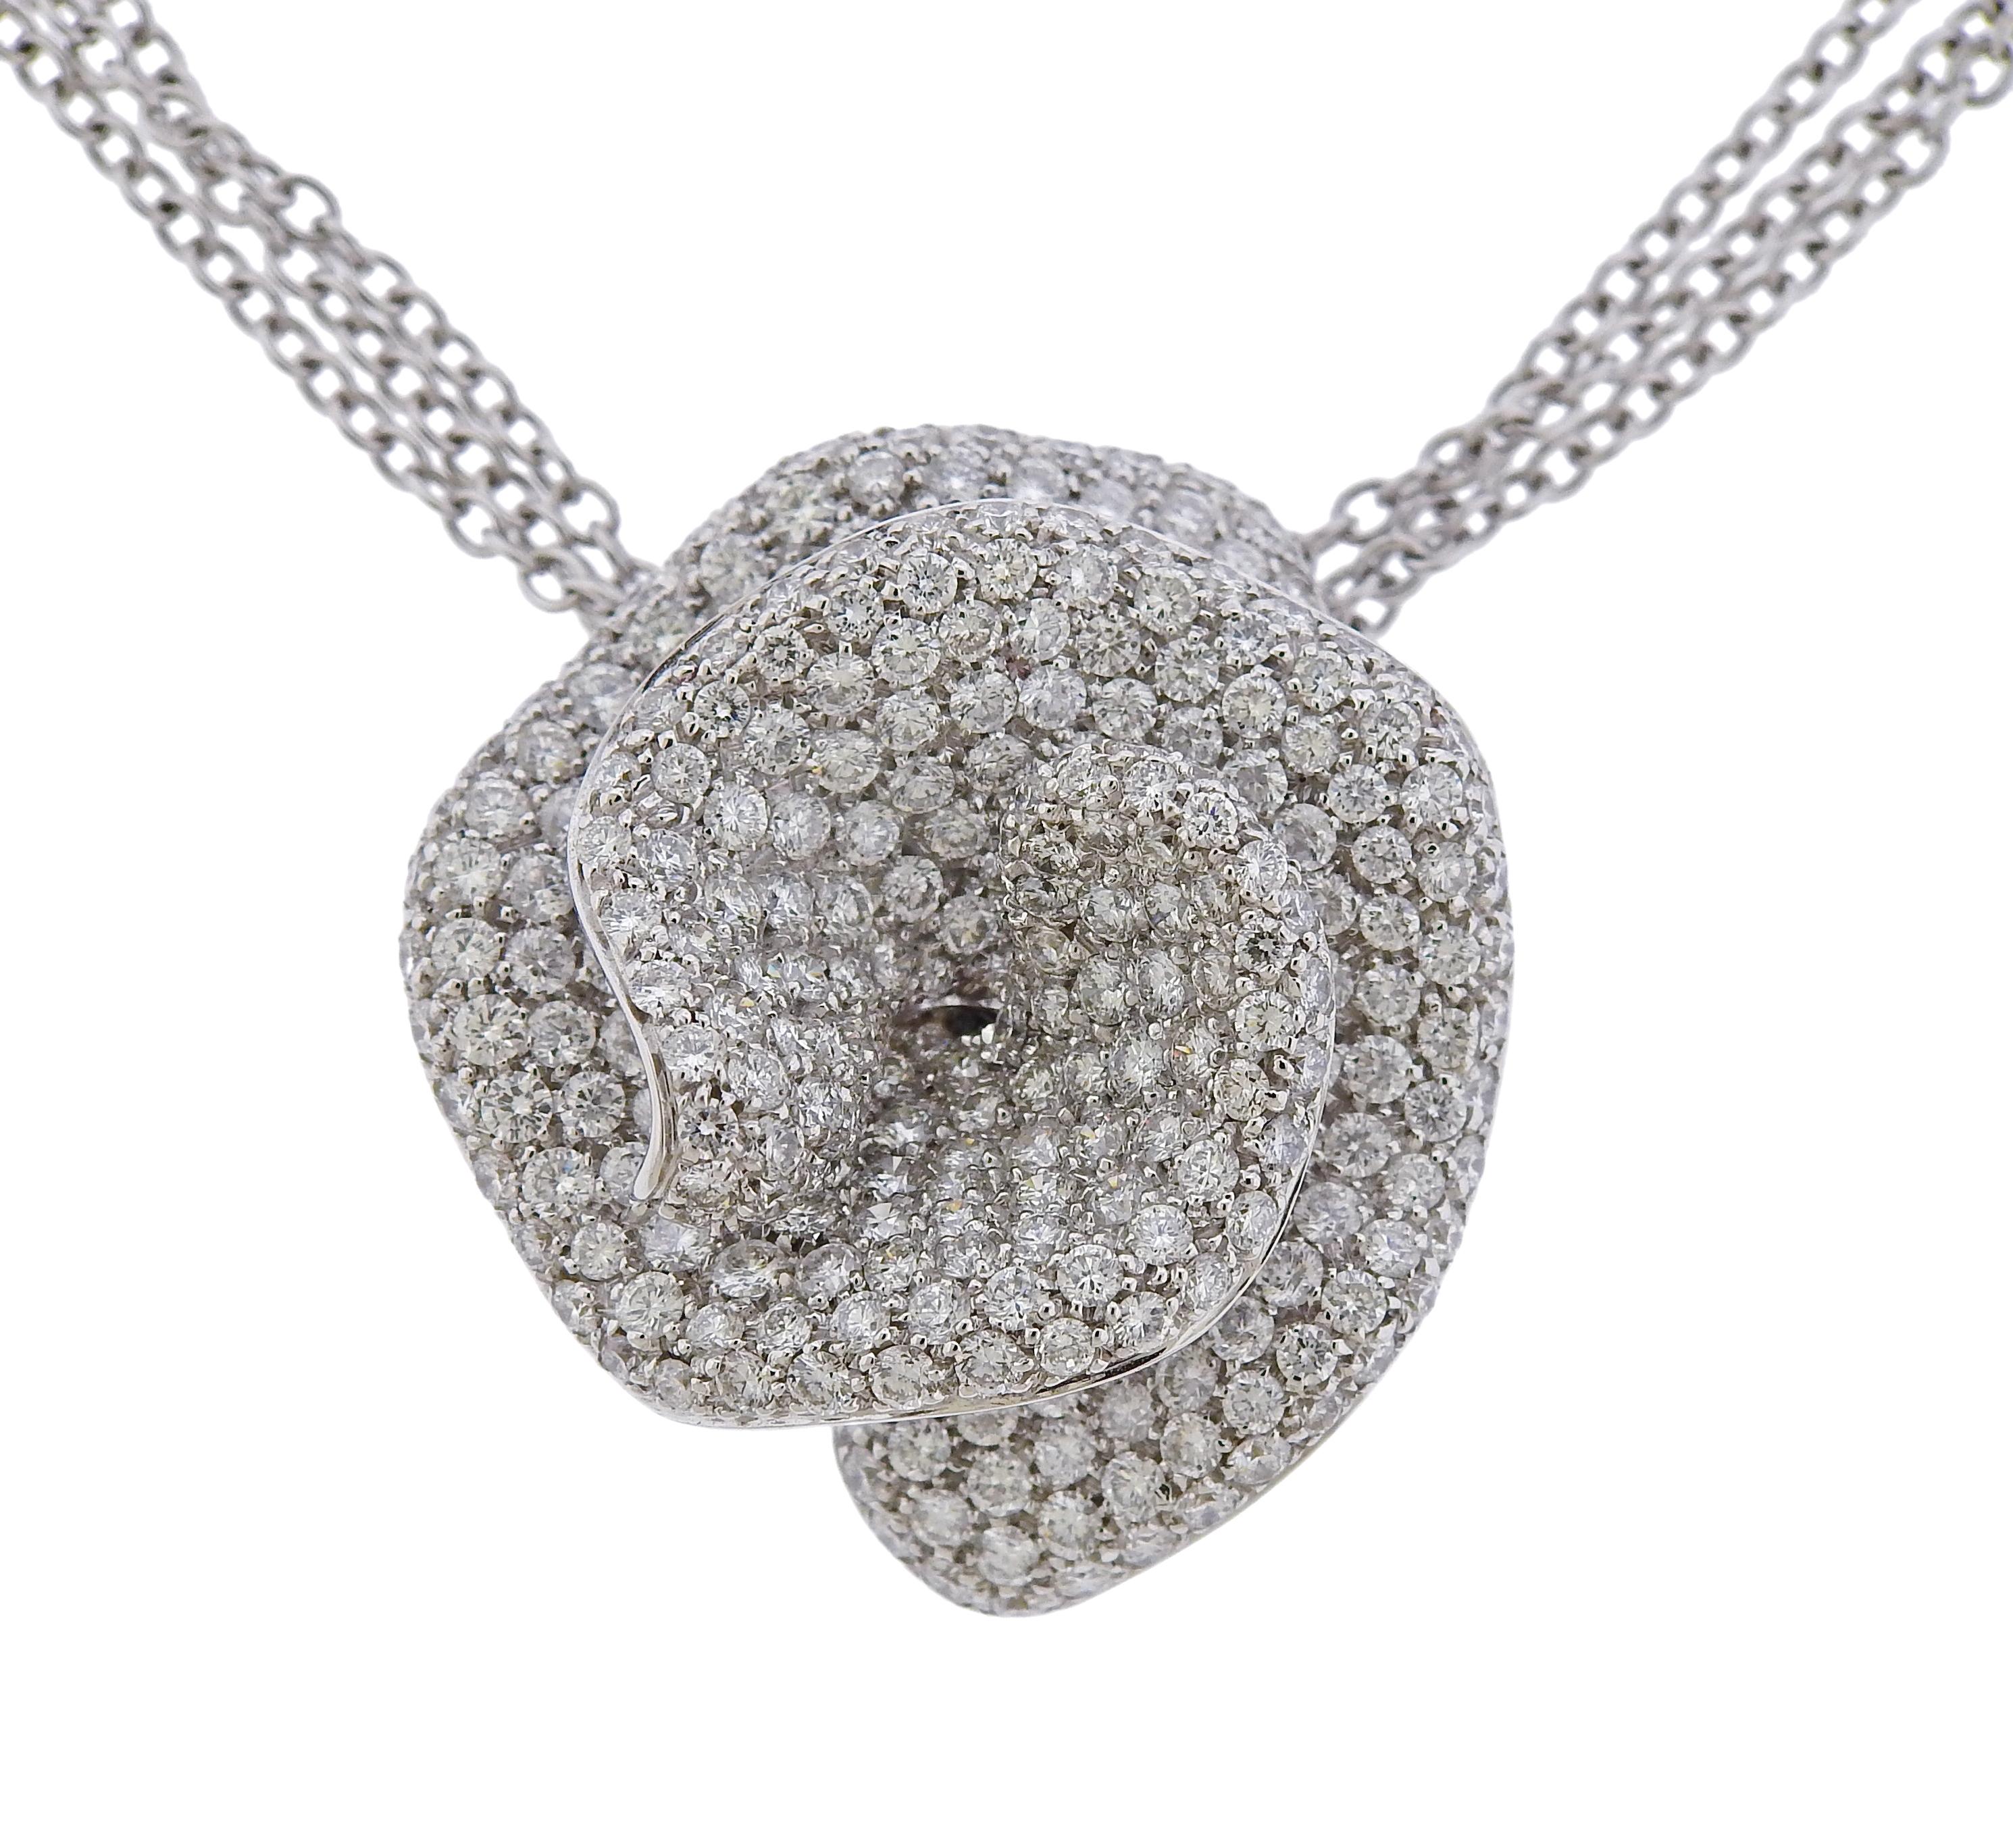 Impressive 18k white gold double chain necklace with detachable pendant brooch, both designed by Stefan Hafner, set with approx. 8 carats in VVS-VS/GH diamonds. Multi chain necklace - adjustable length from15